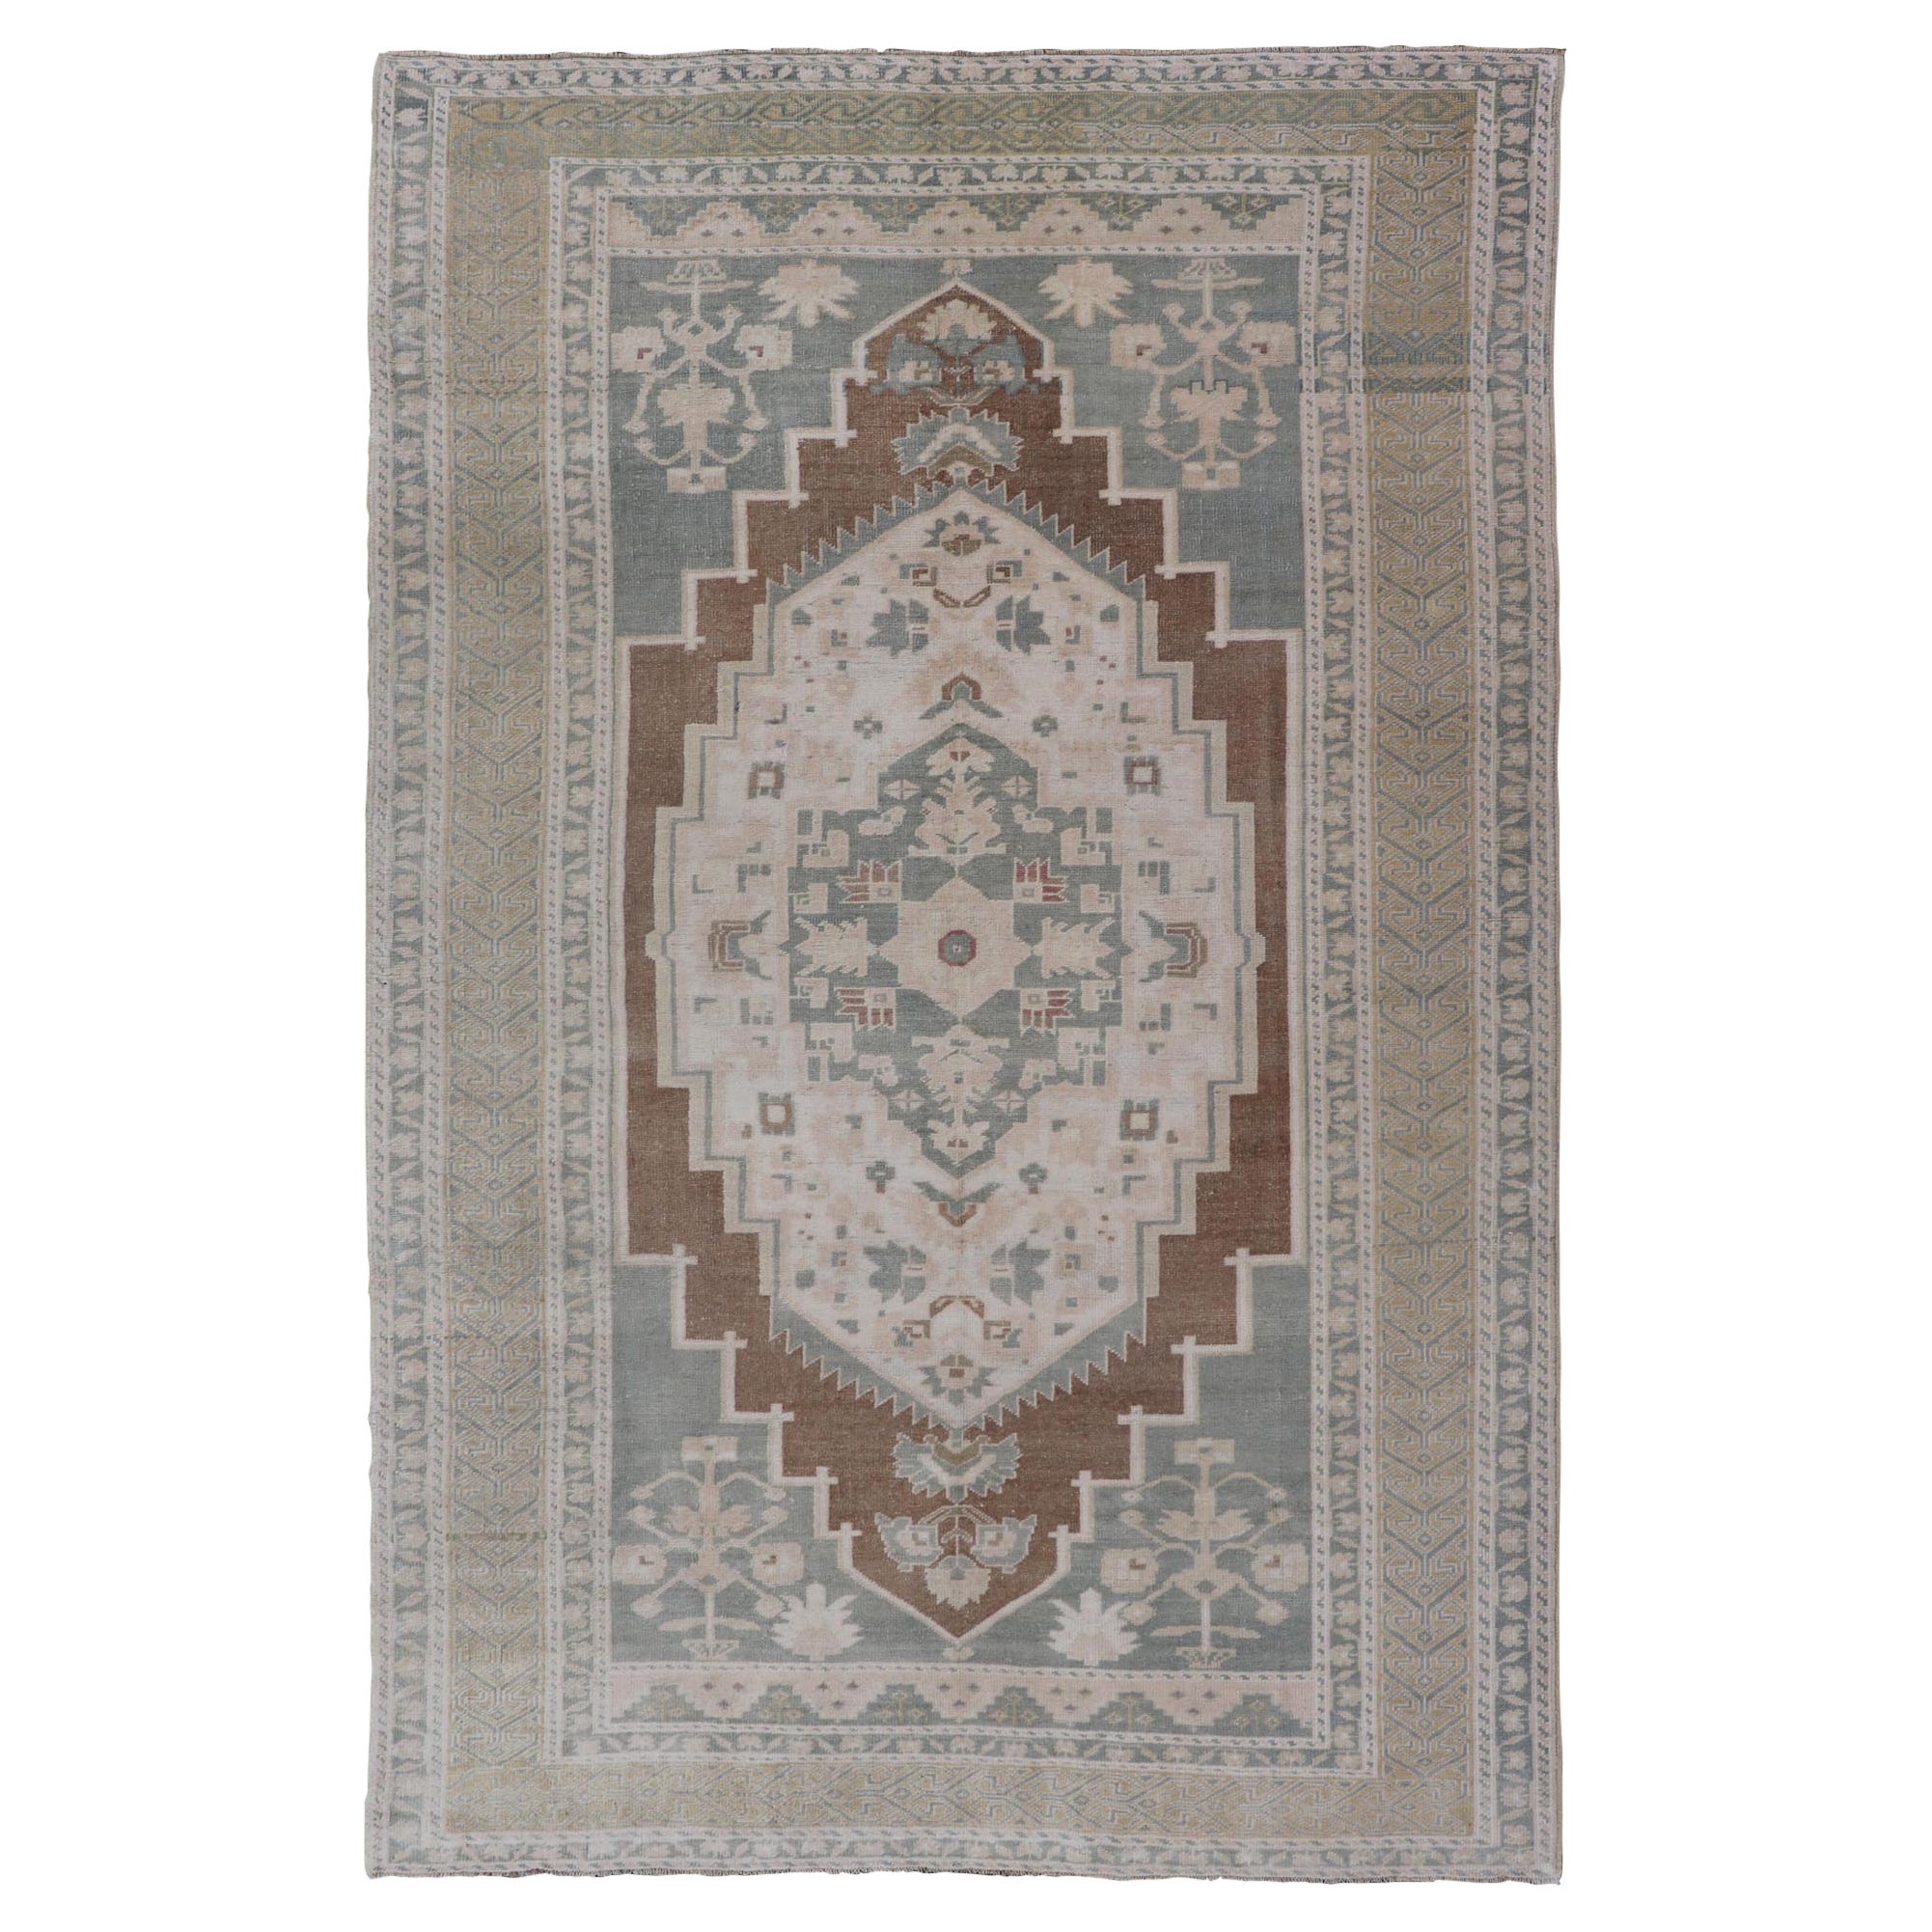 Vintage Turkish Oushak with Medallion in Taupe, Lt. Brown, Grey Blue, & Tan